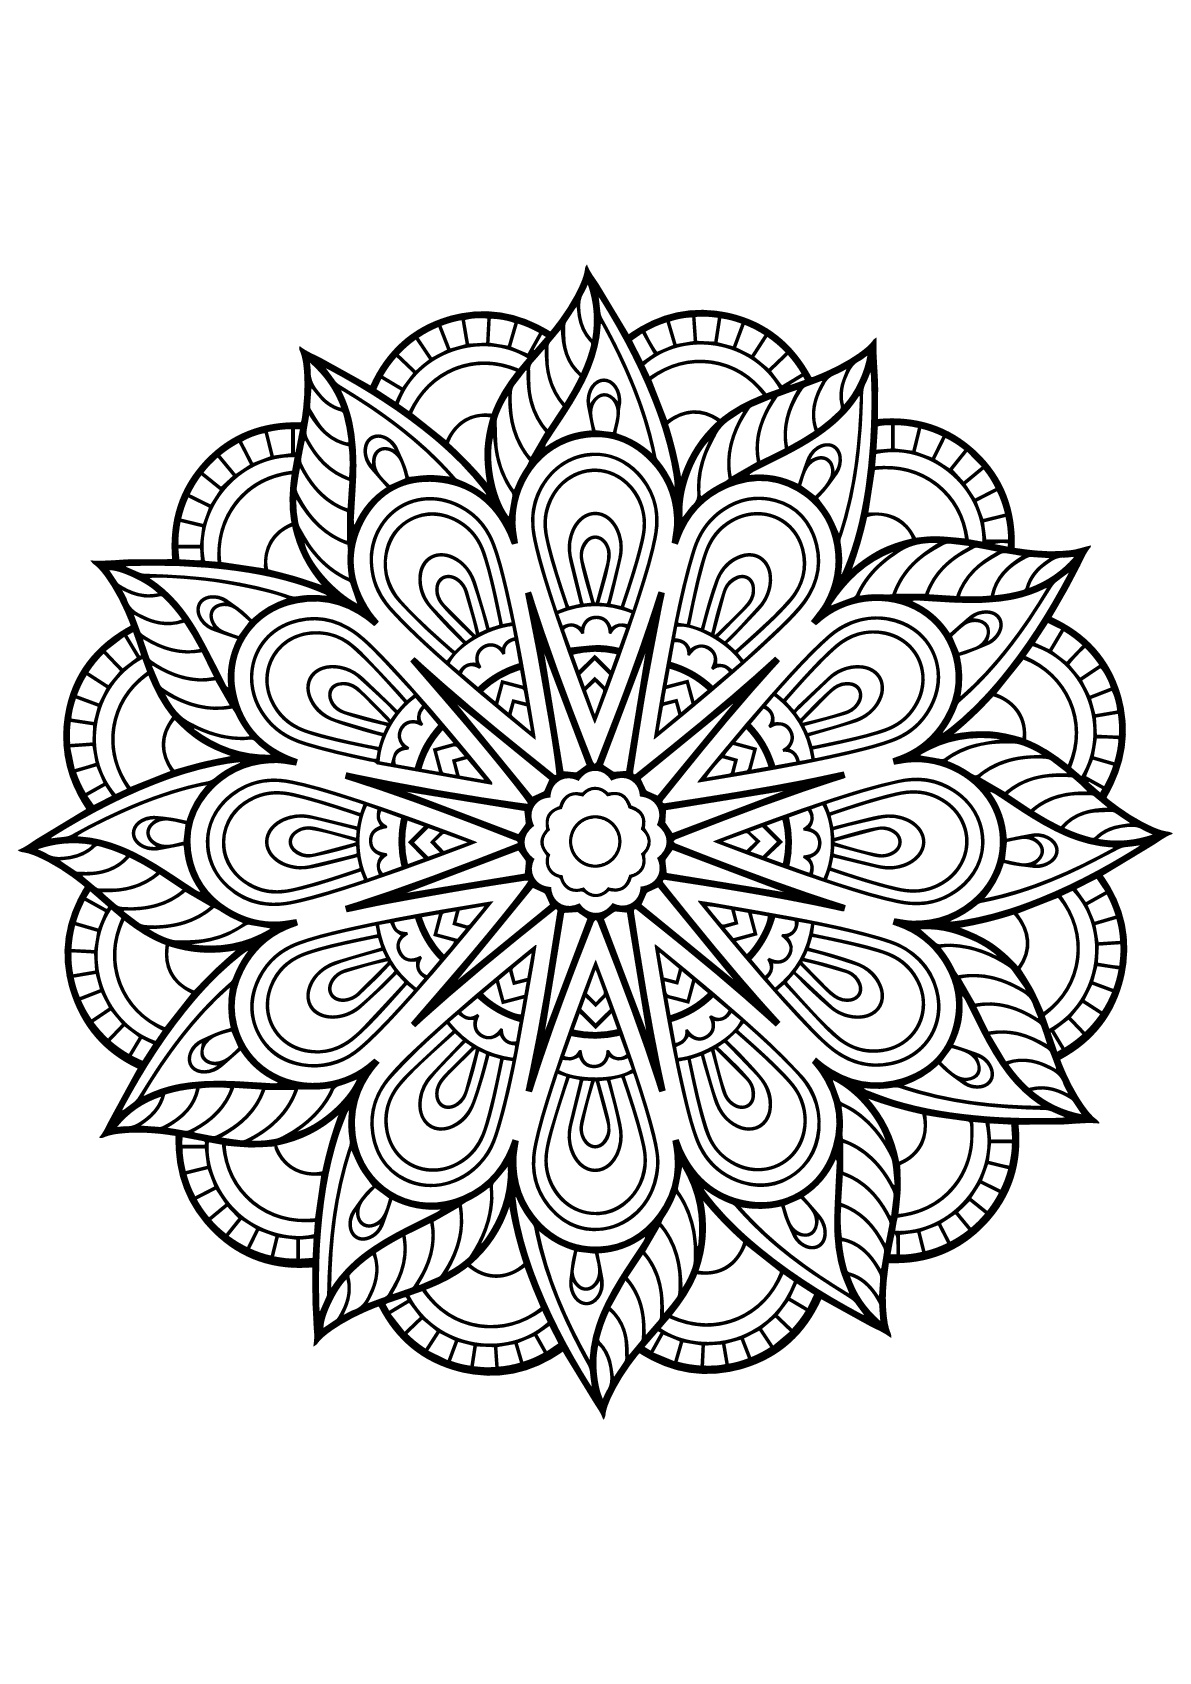 Mandala from free coloring books for adults 1 - Mandalas Adult Coloring  Pages